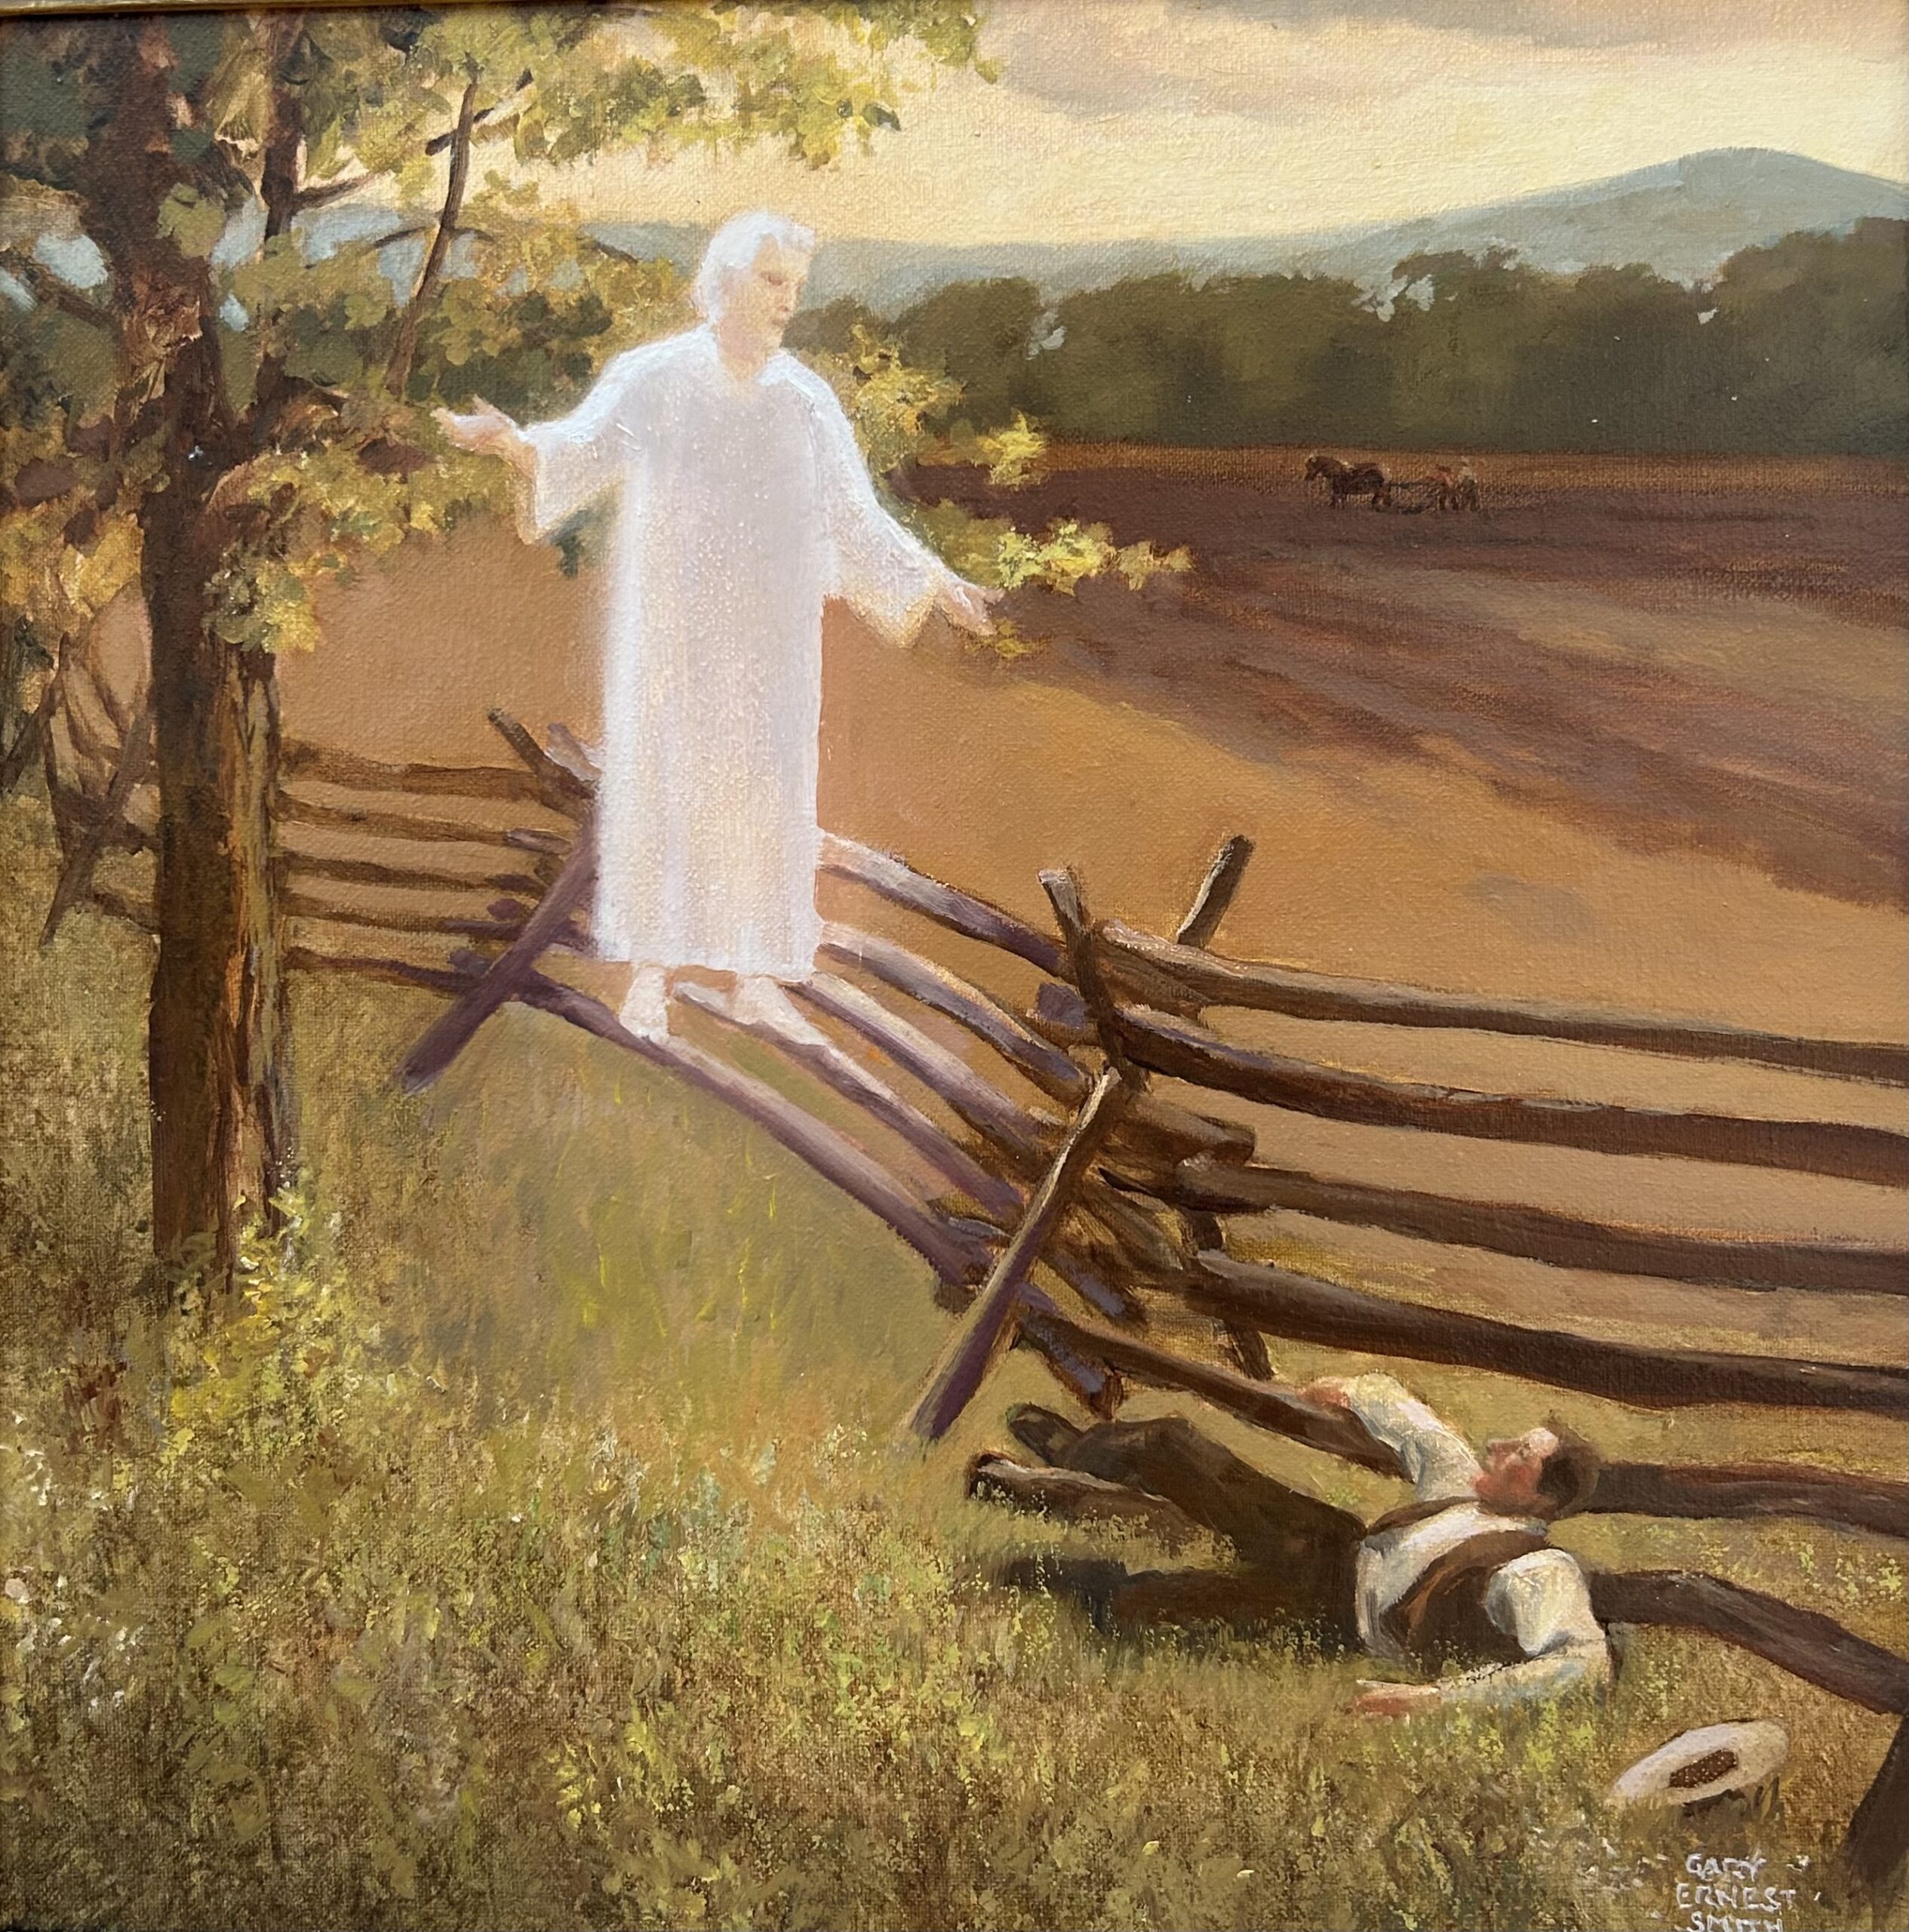 Moroni Appears Outdoors to Young Joseph